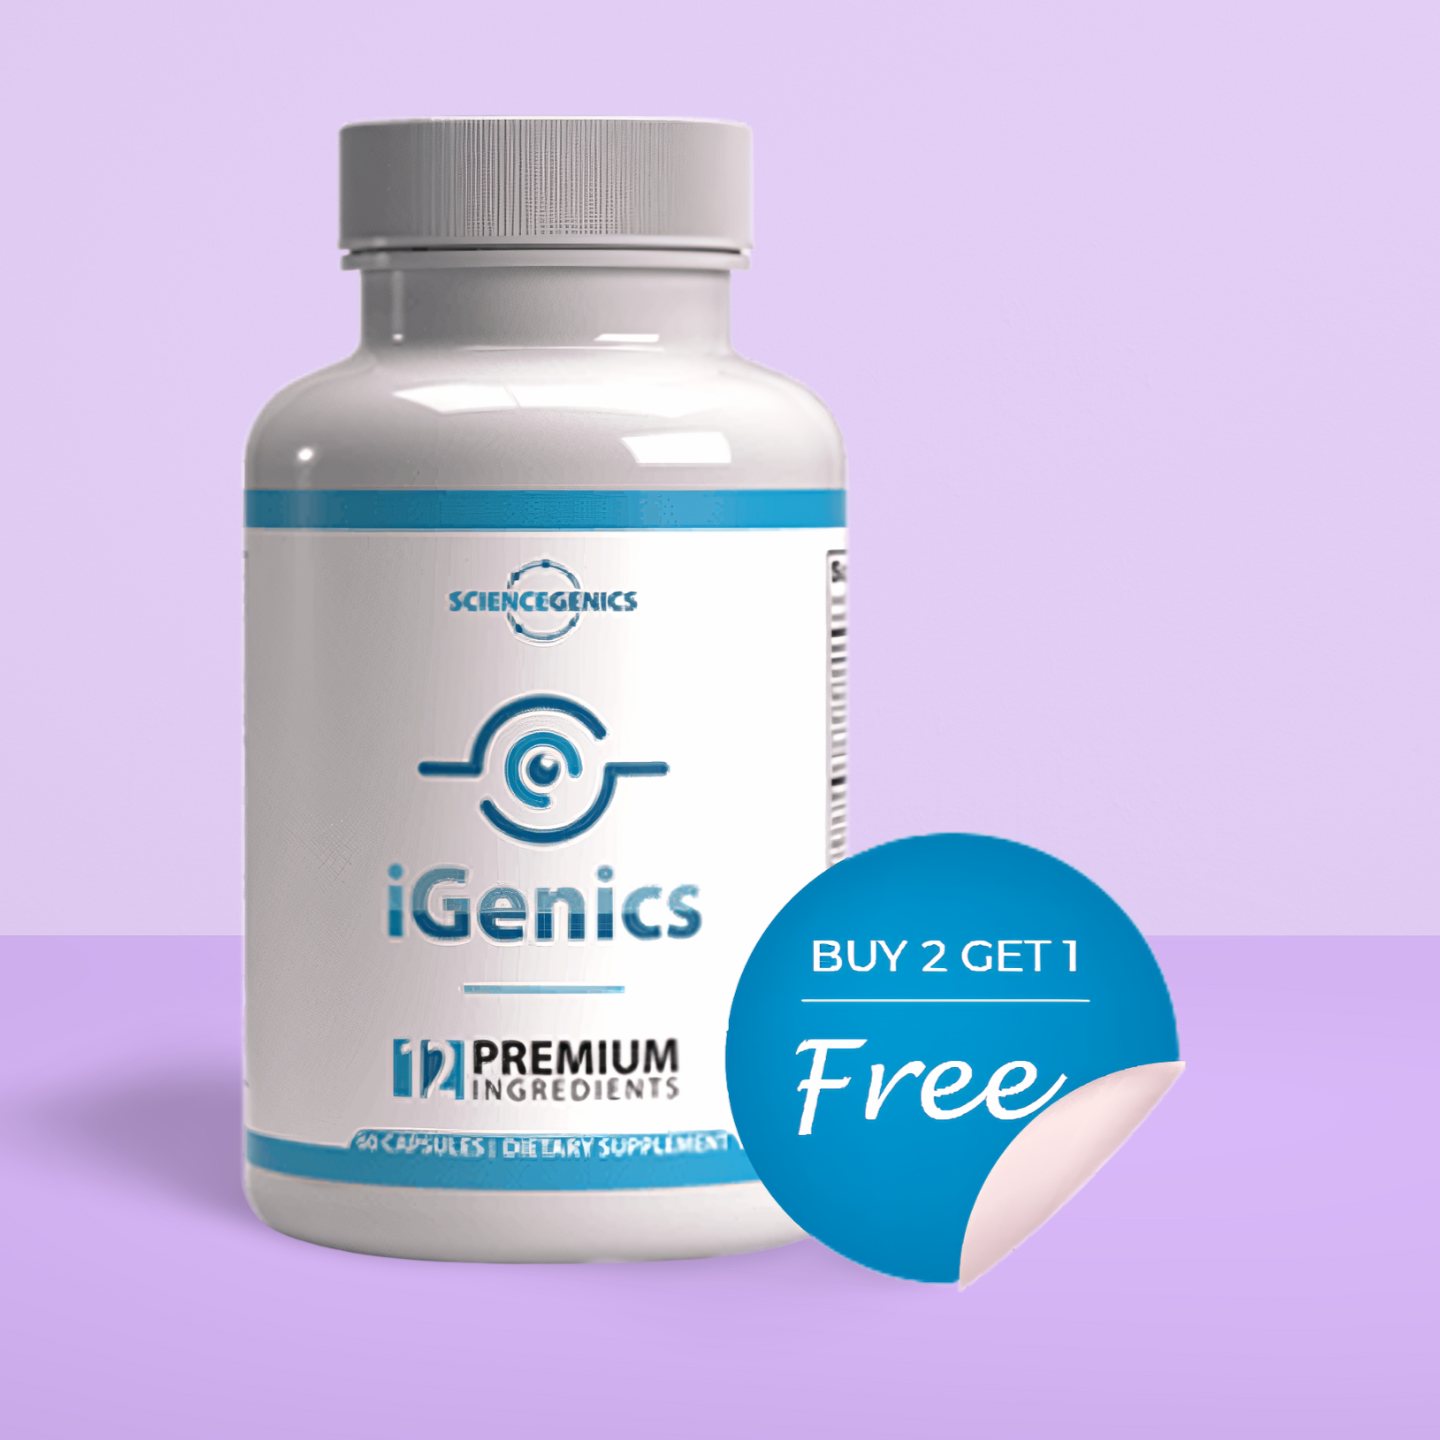 IGenics Reviews: Can This Dietary Supplement Really Restore Your Vision?